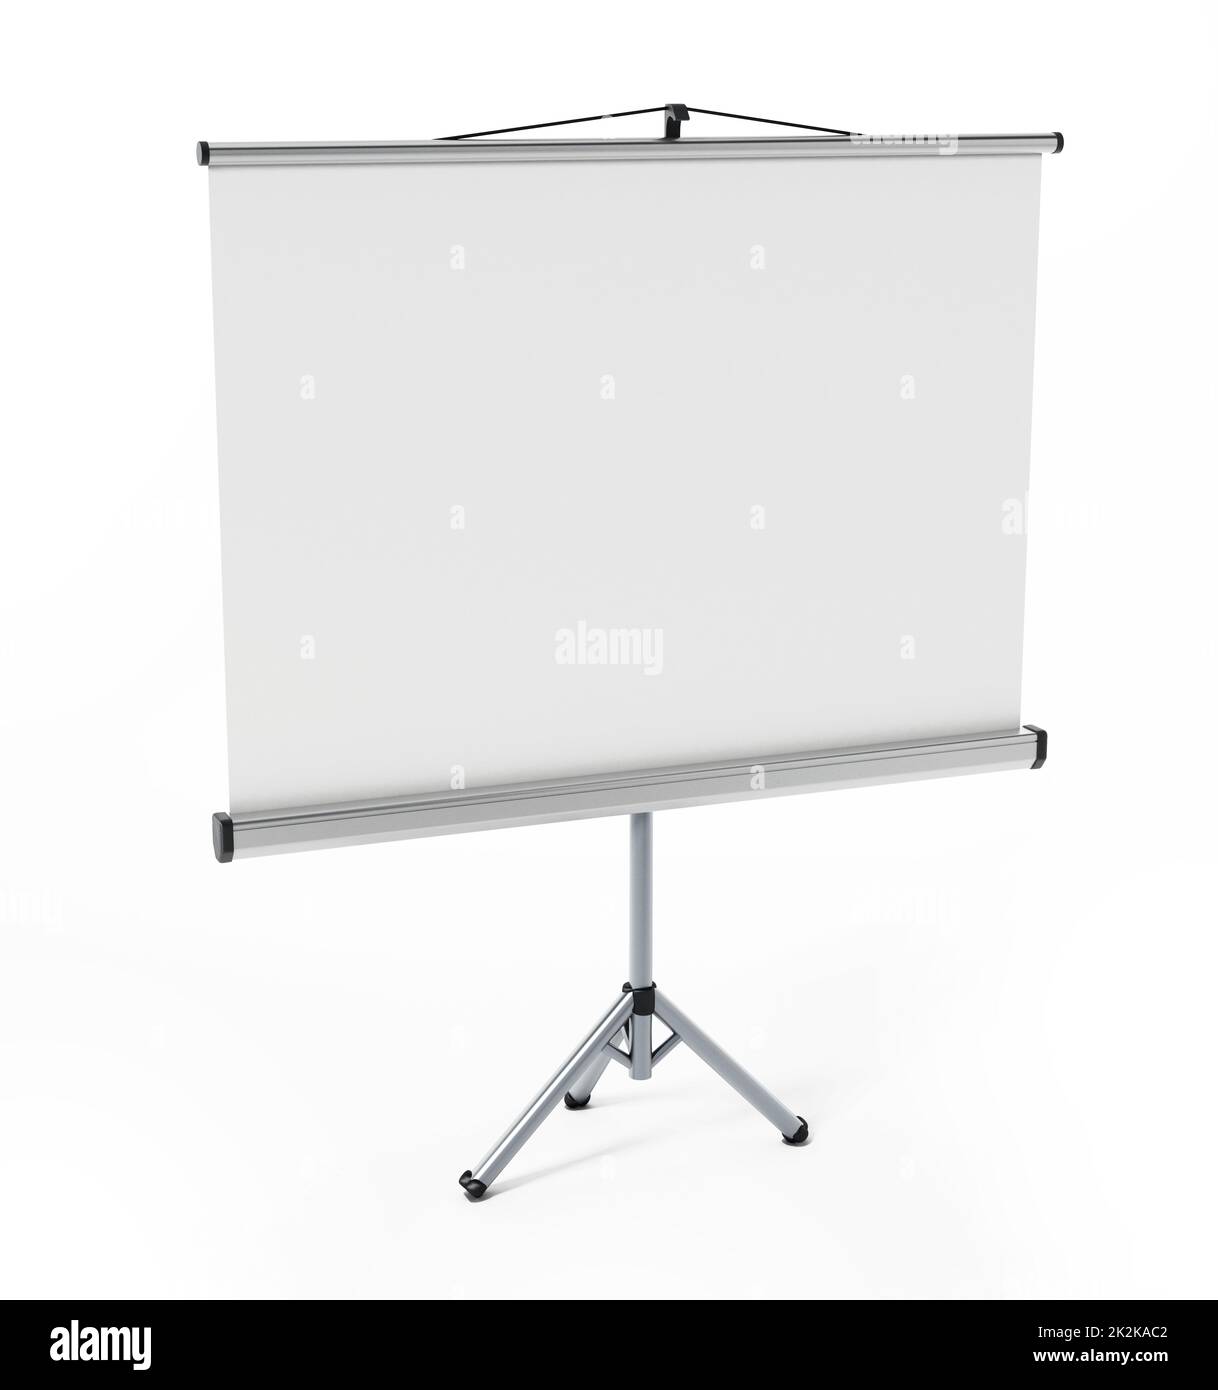 Projection screen isolated on white background. 3D illustration Stock Photo